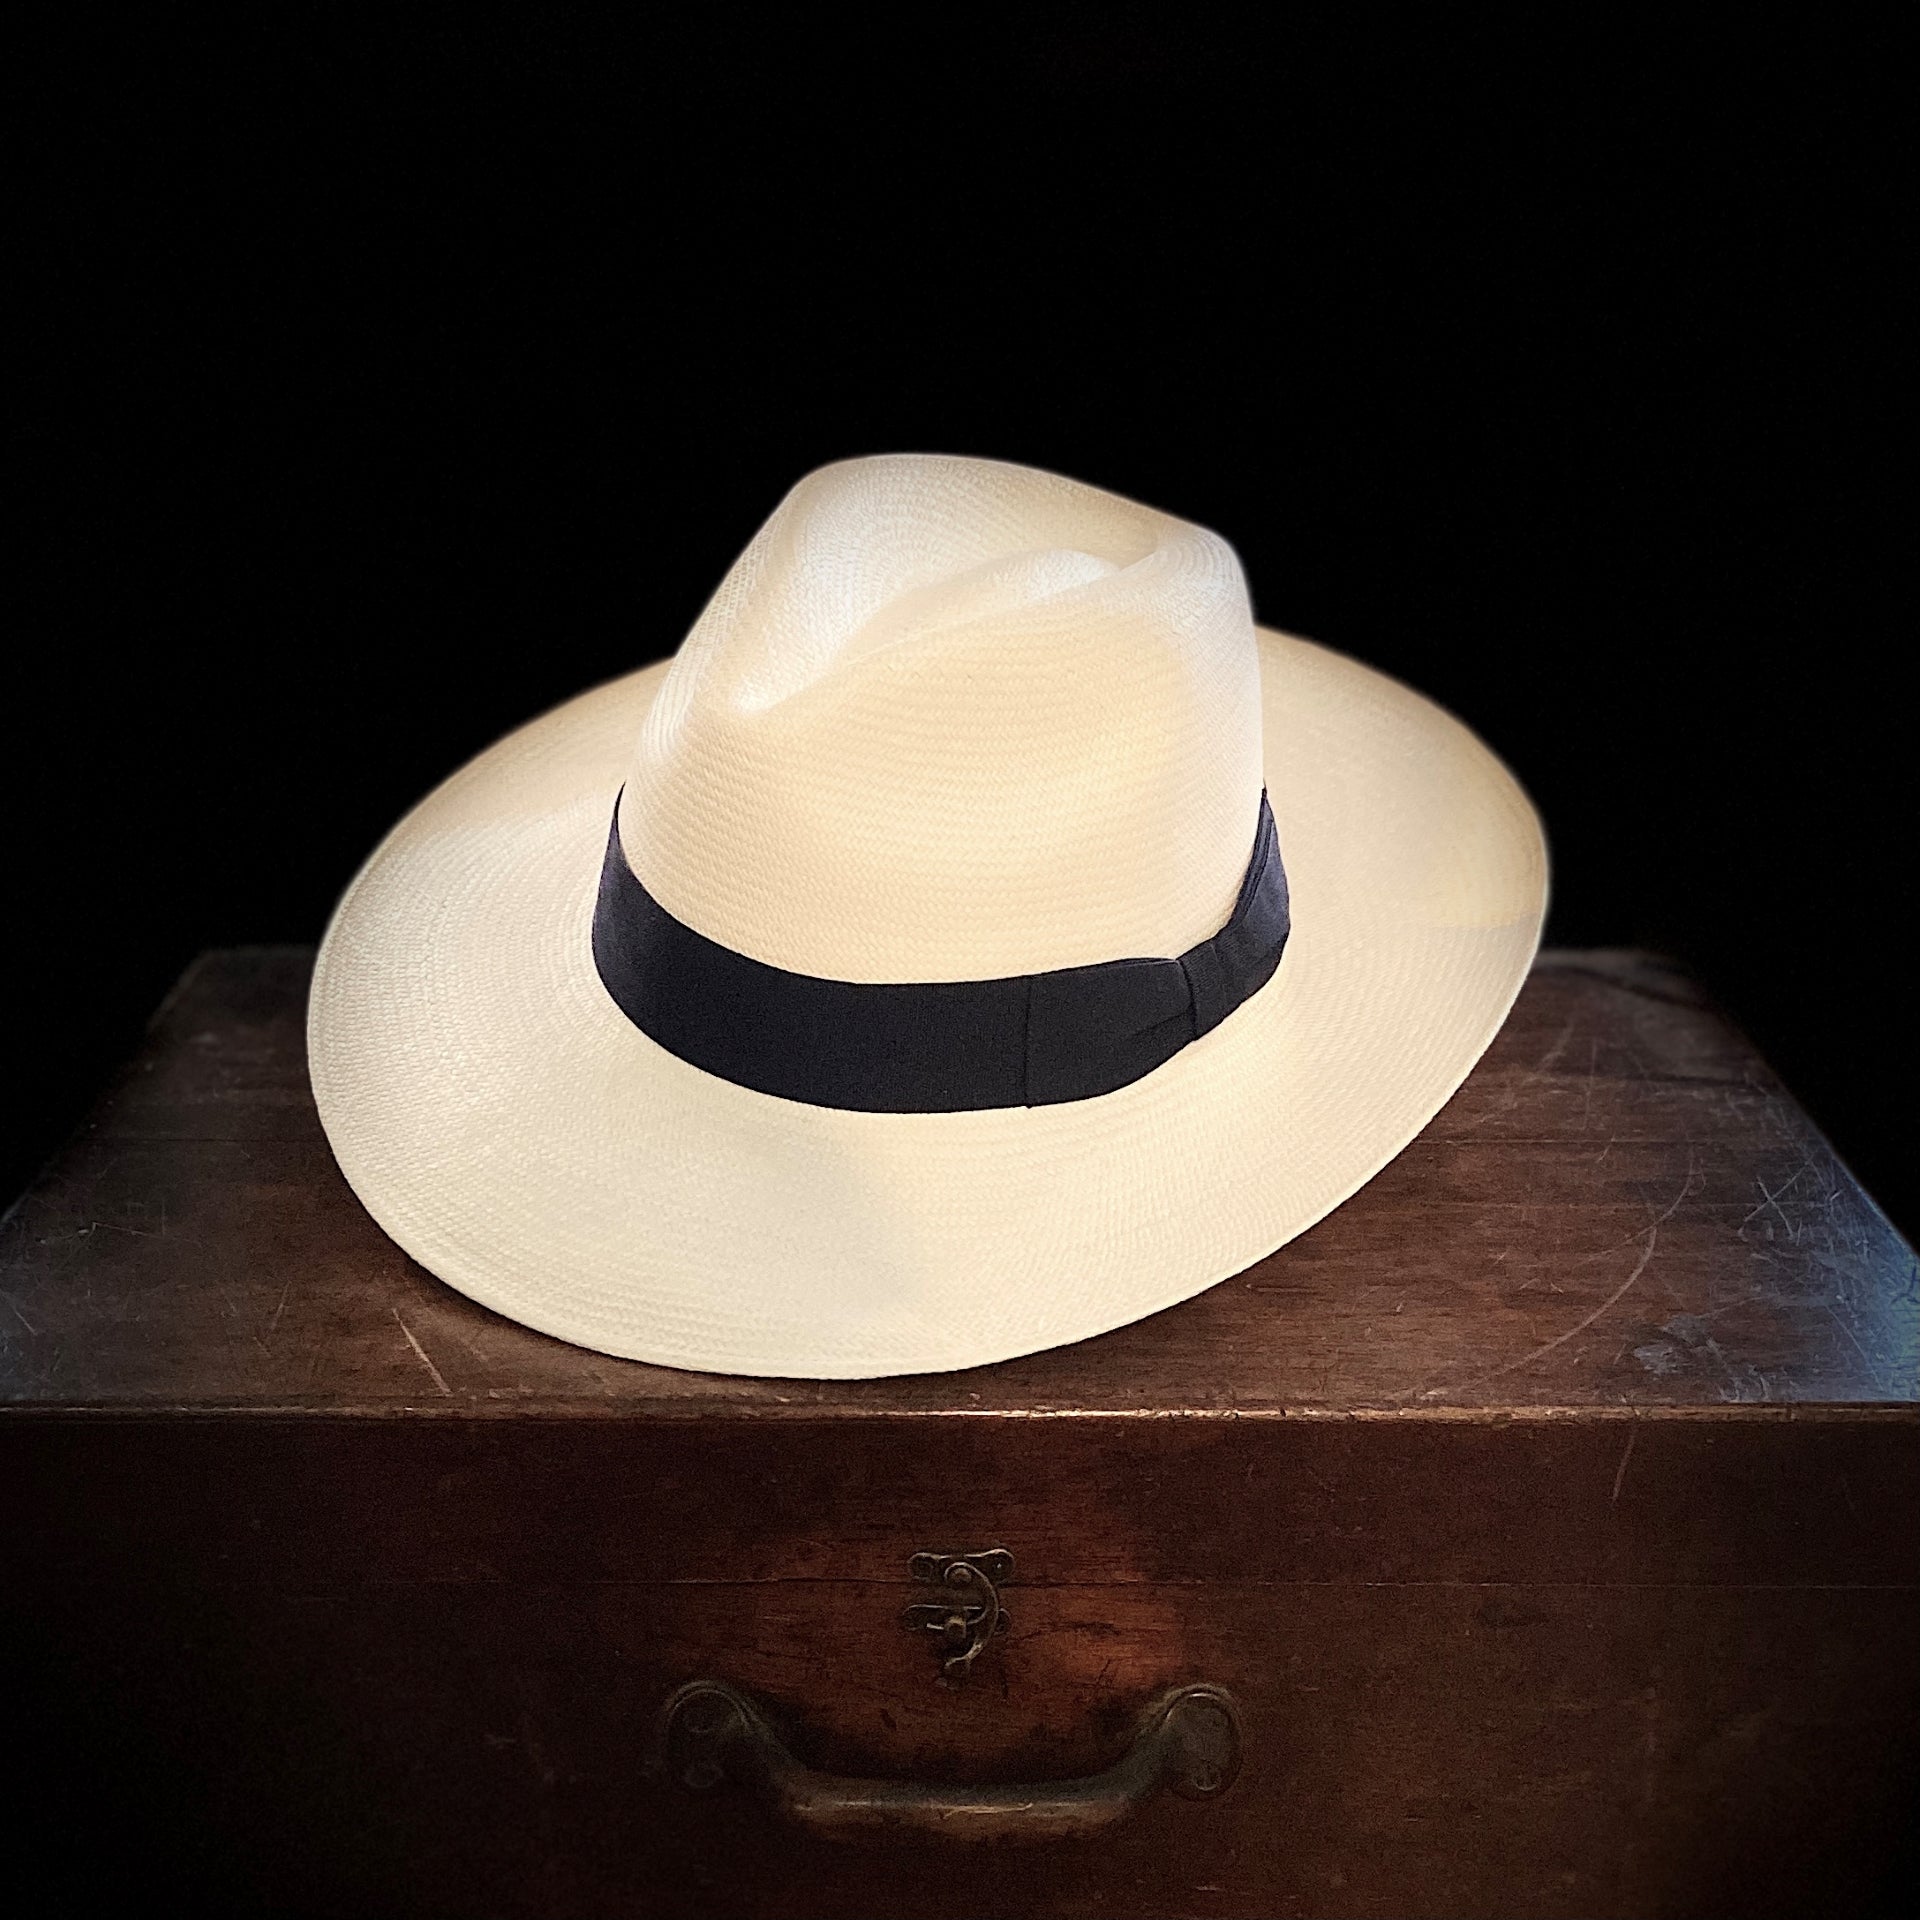 New Arrival Classical Panama Hat Catherine Deneuve [Free shipping and box packing]